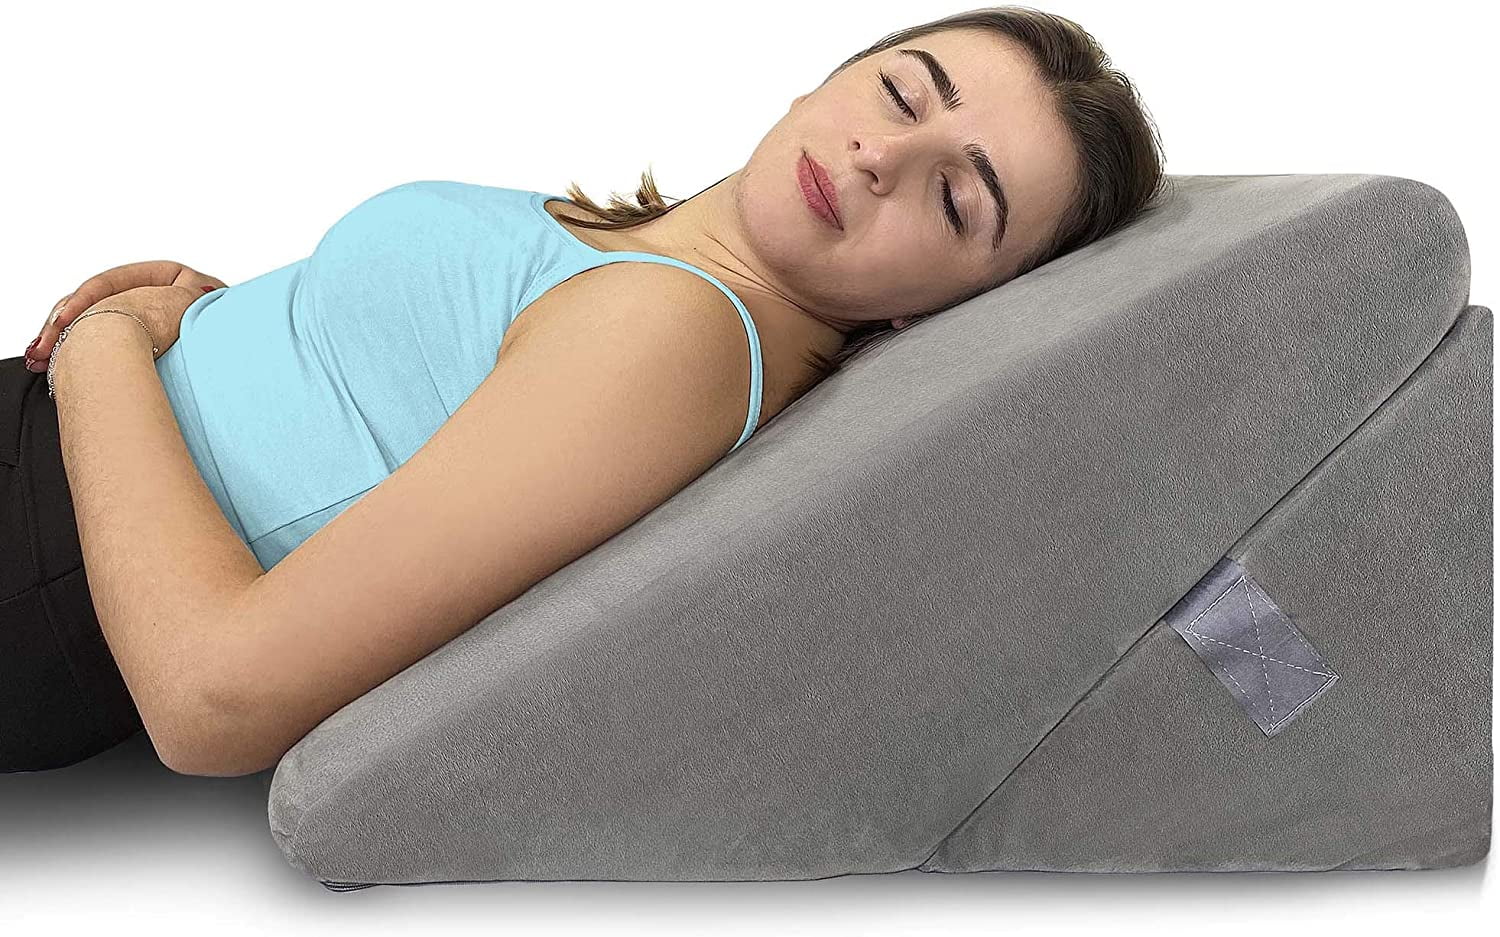  Lossey Wedge Pillow for Sleeping, 12 Inch Bed Wedge